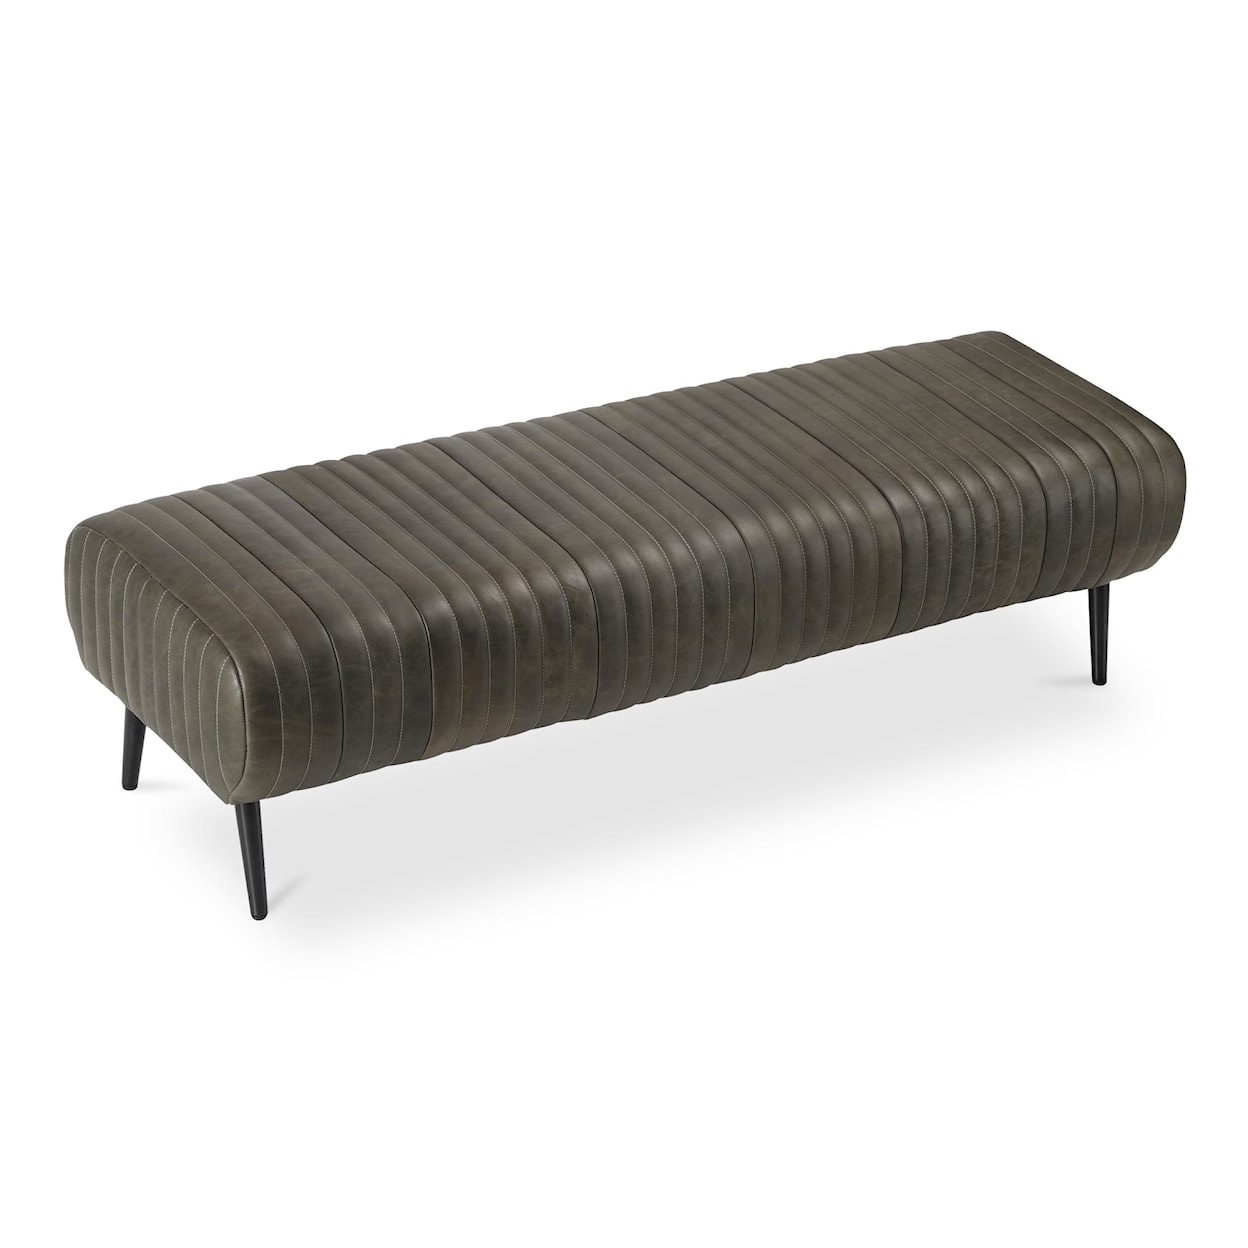 Moe's Home Collection Endora Upholstered Bench